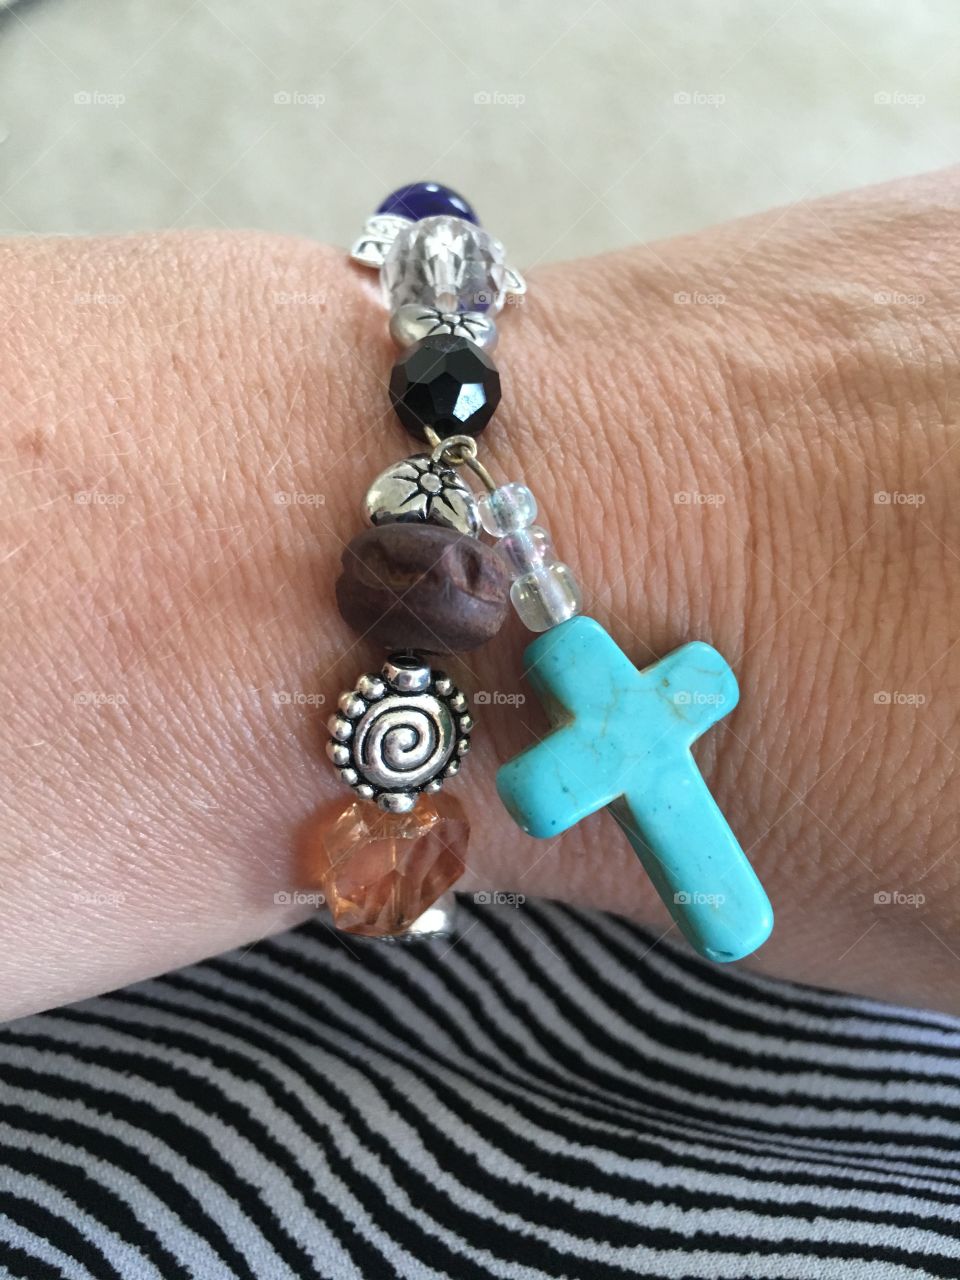 Grandmothers are known for their love and prayers for their families. This beautiful beaded cross bracelet was one such gift of love and prayers!